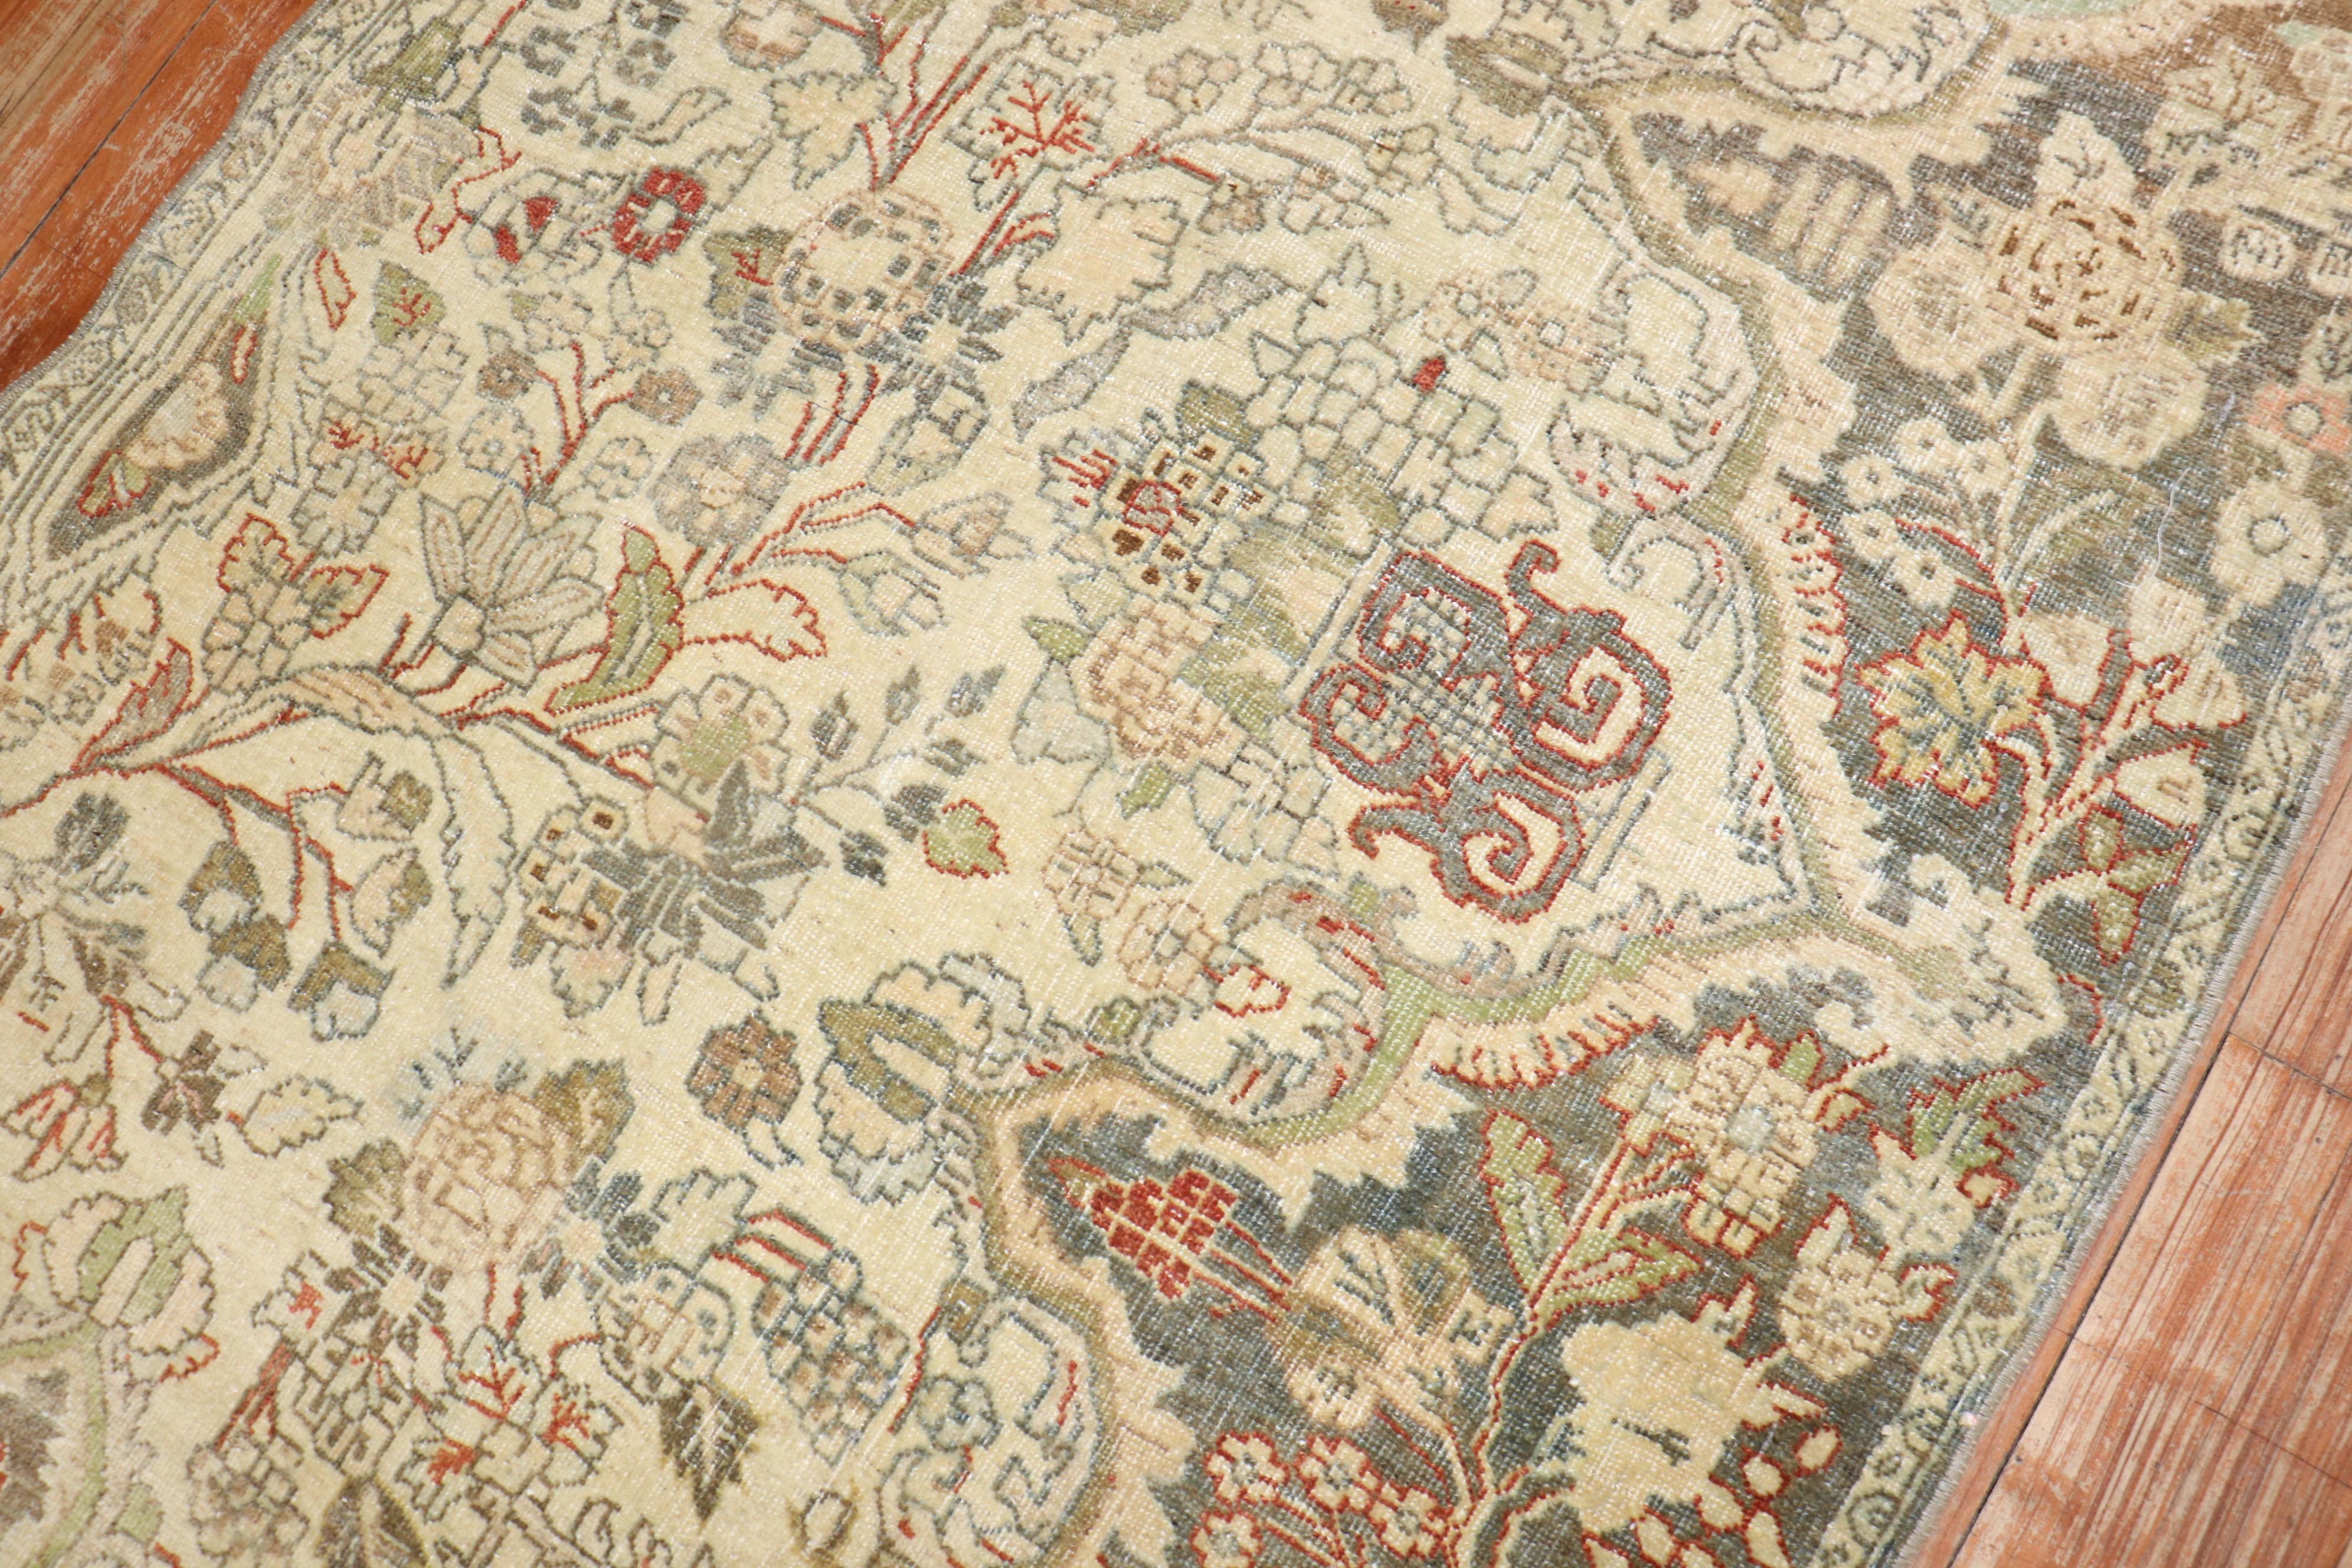 A sampler rug from an antique Persian Isfahan rug from the 1st quarter of the 20th Century

3'2'' x 4'10''.